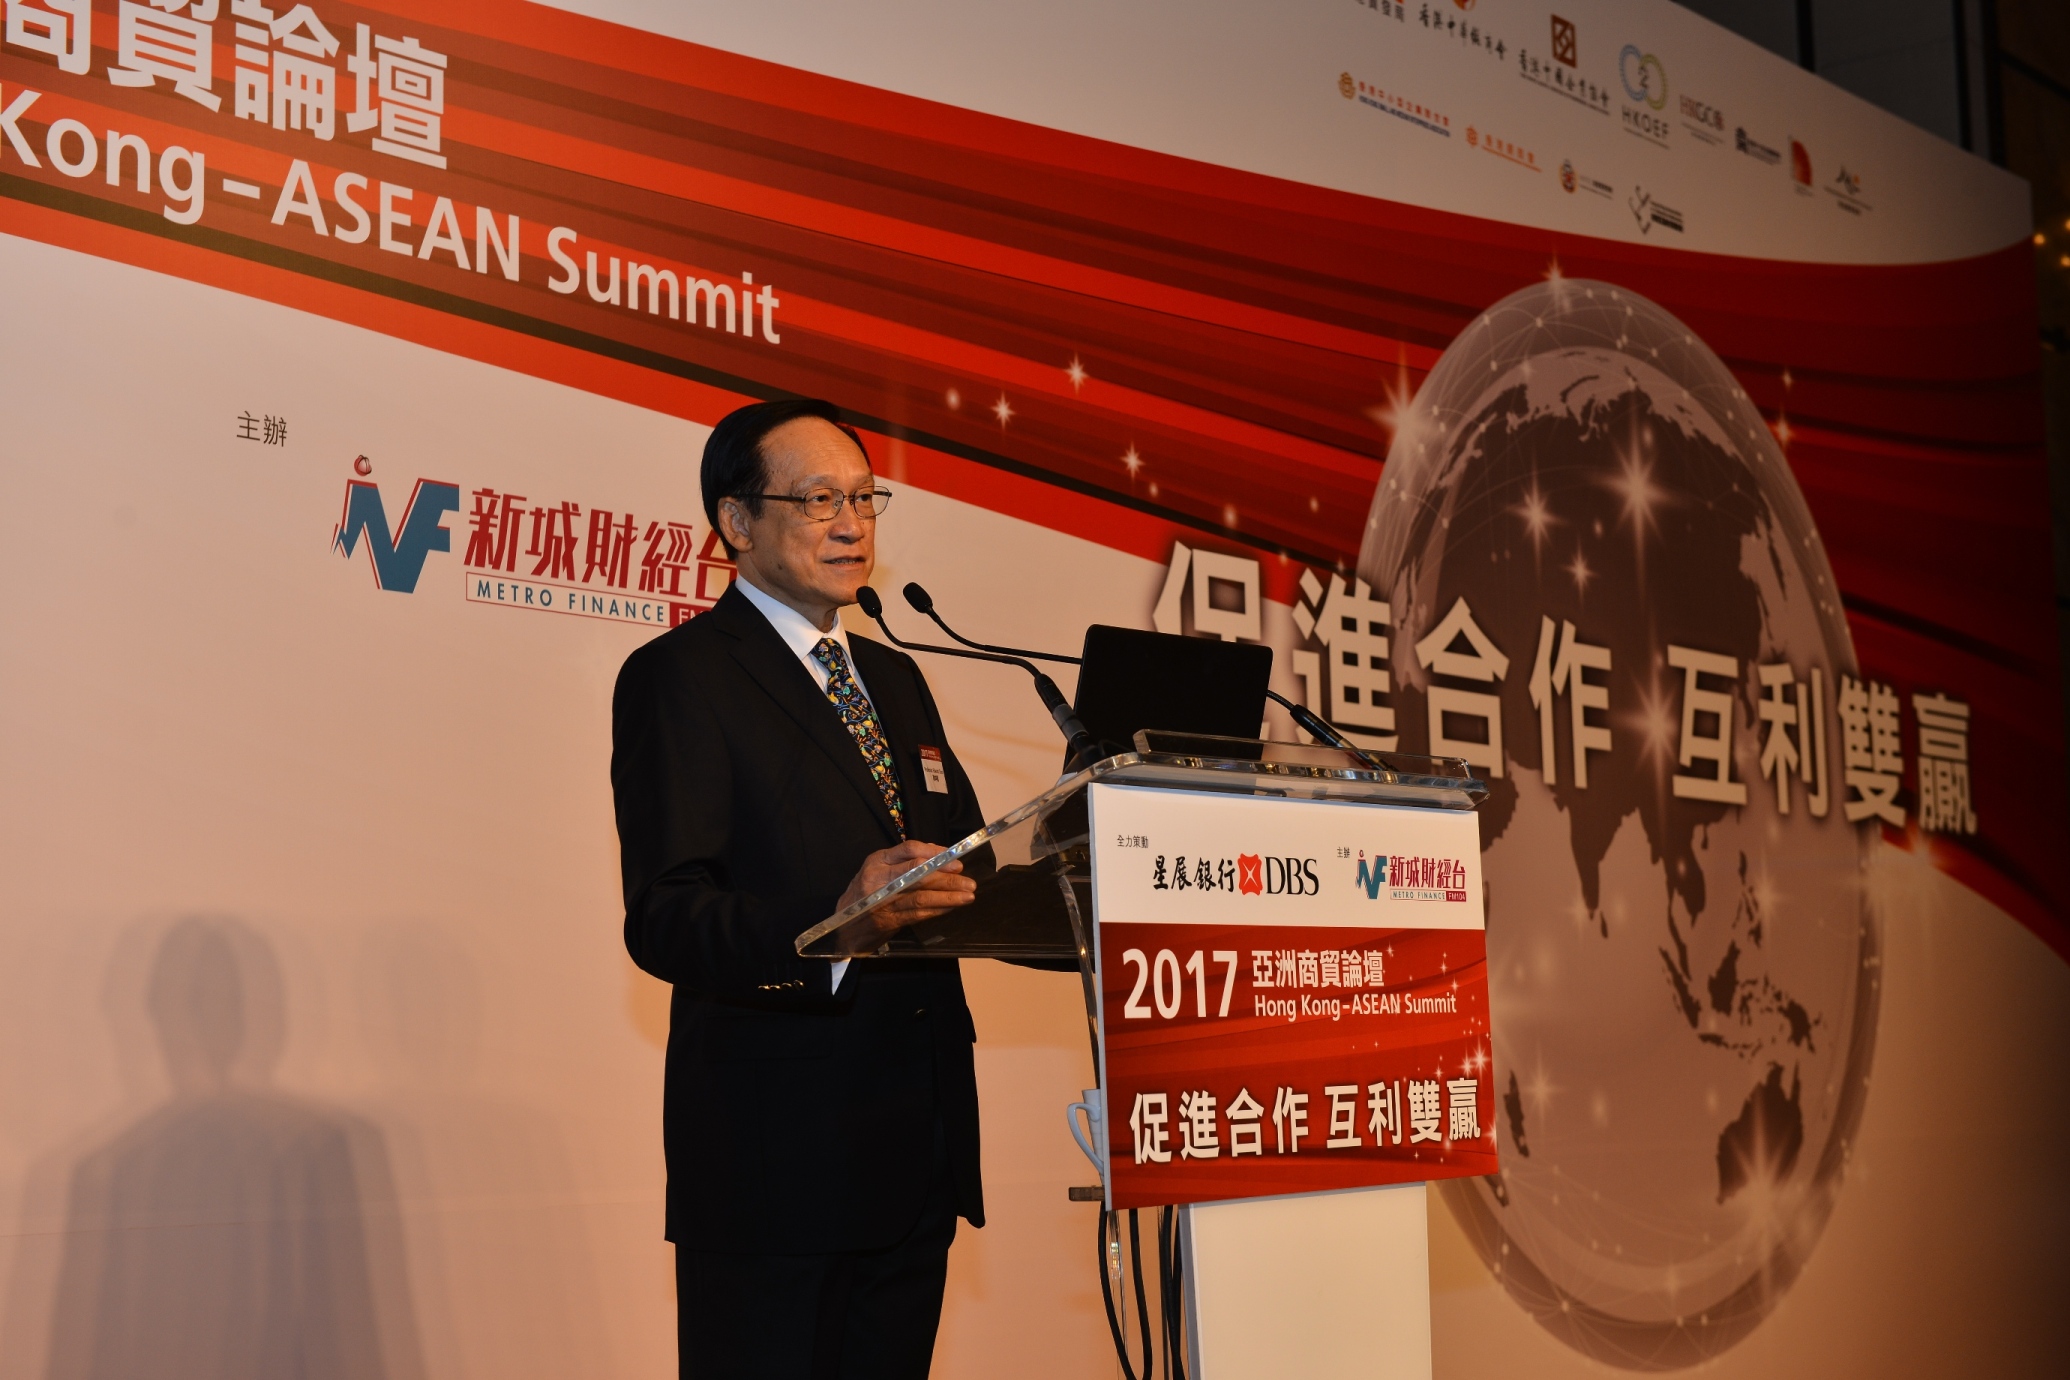 Photo 4: Professor Edward Chen, Chairman of HKU School of Professional and Continuing Education, then shared his views on how Hong Kong can promote the interoperability of Asian countries and the Belt and Road initiative in his opening speech.